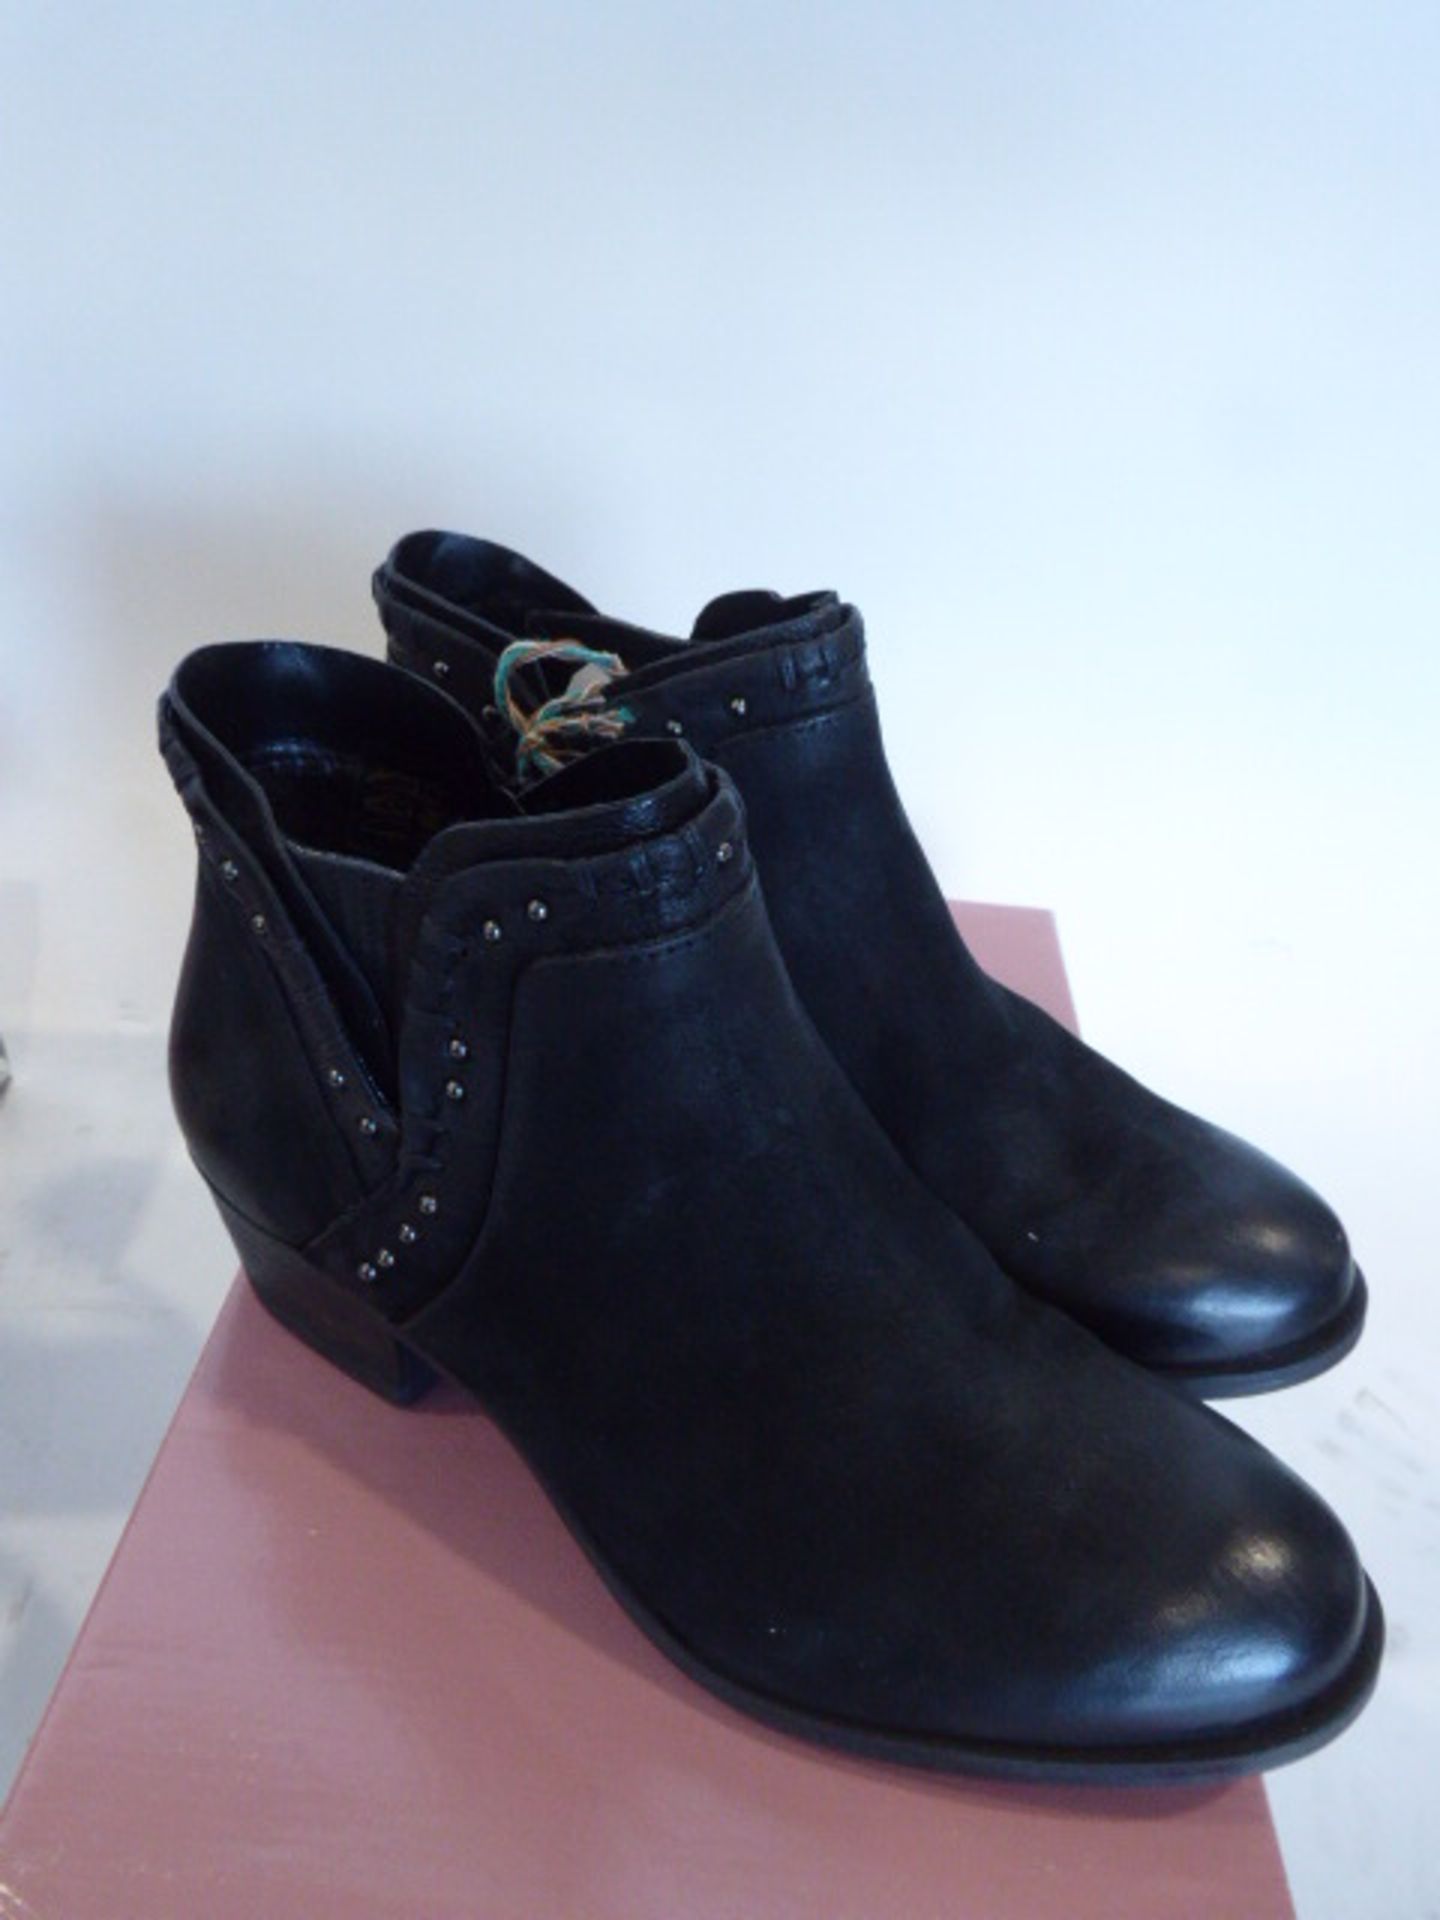 2 pairs of Moda in Pelle Beretia boots sizes EU 38 and 39 - Image 5 of 5